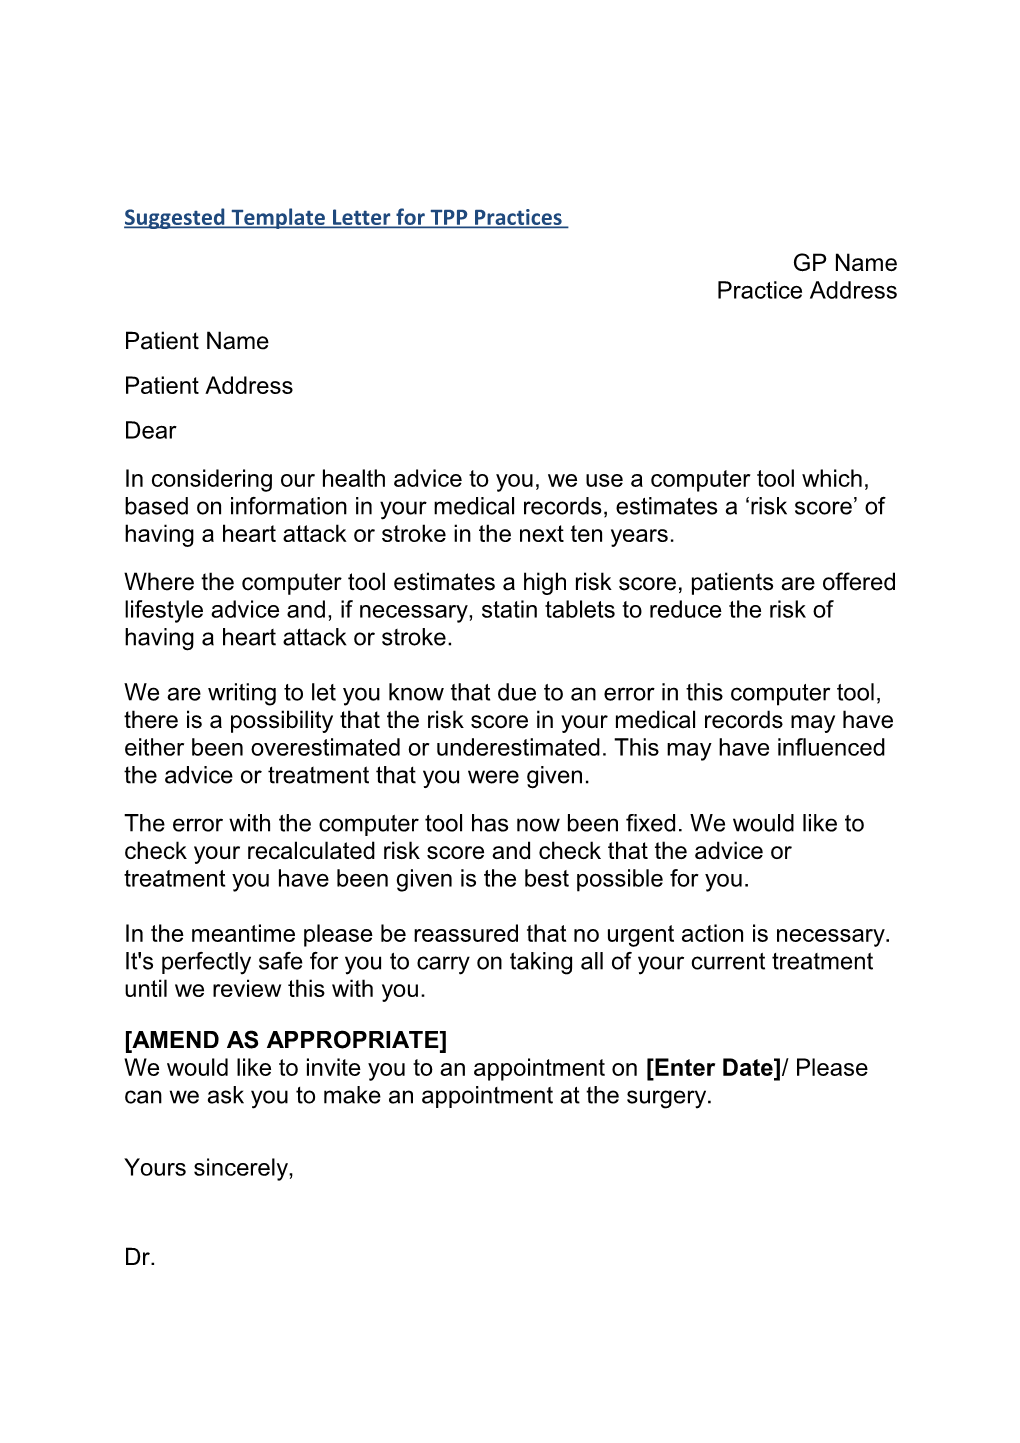 NHS England Suggested Template Letter